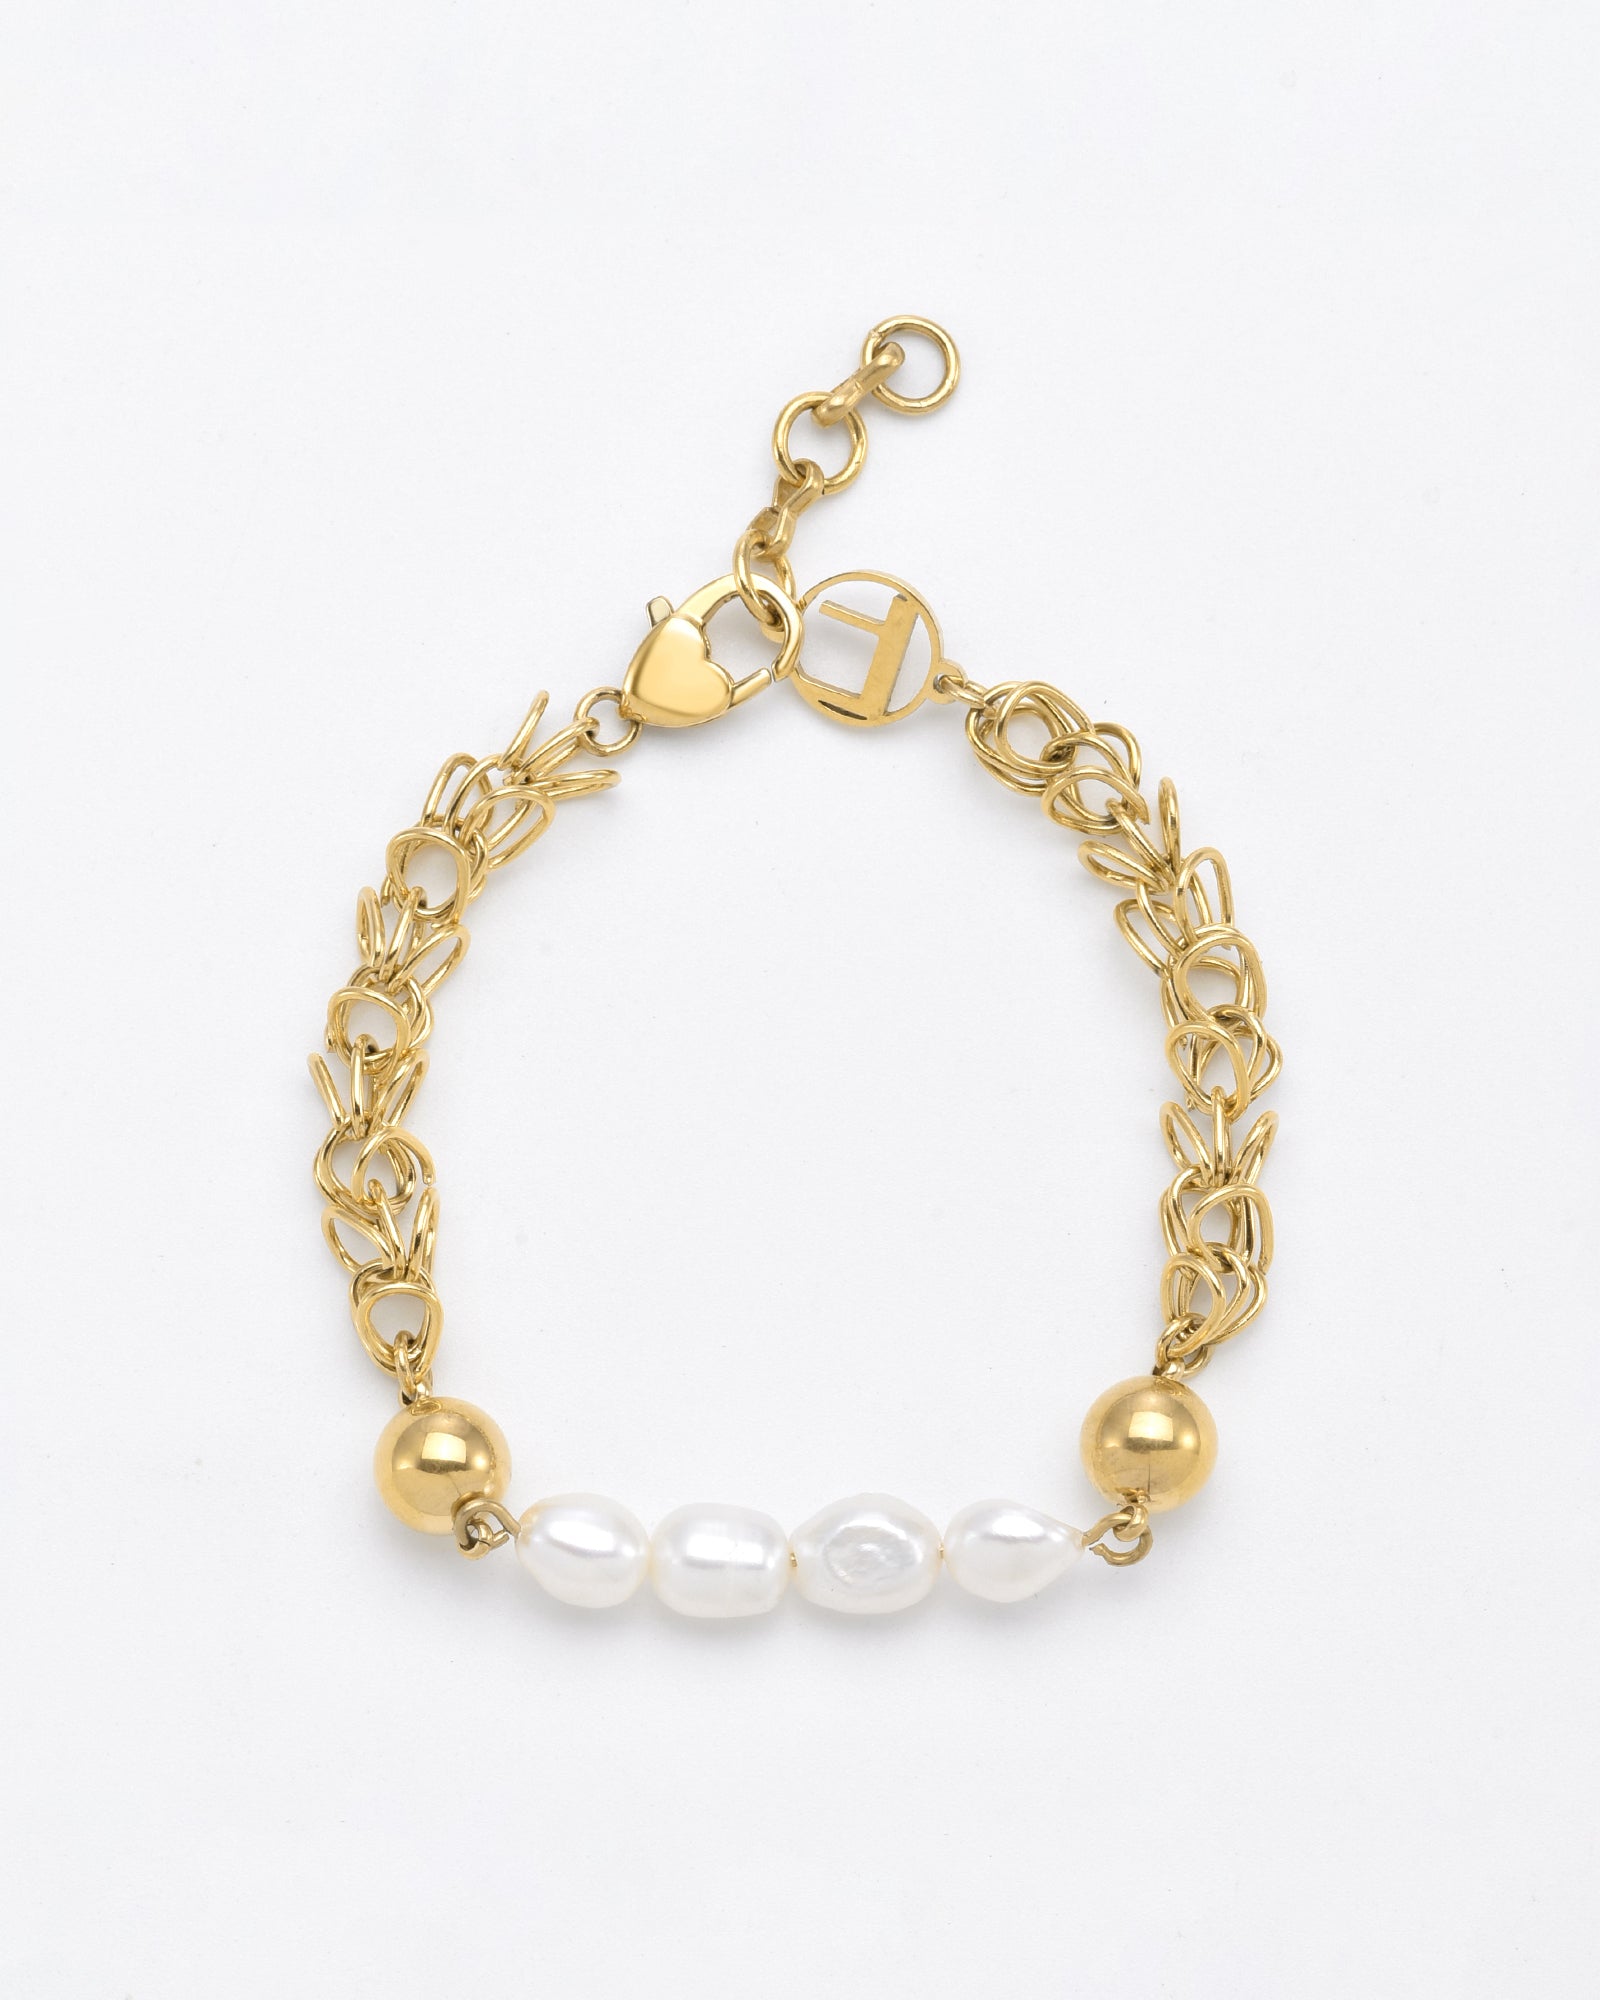 The For Art&#39;s Sake® Athena Bracelet Gold showcases refined elegance with its gold chain featuring a mix of intricate and bold link designs. Adorned with two gold beads and five freshwater pearls at the center, it has a lobster clasp and a small, heart-shaped charm near the clasp for added detail.